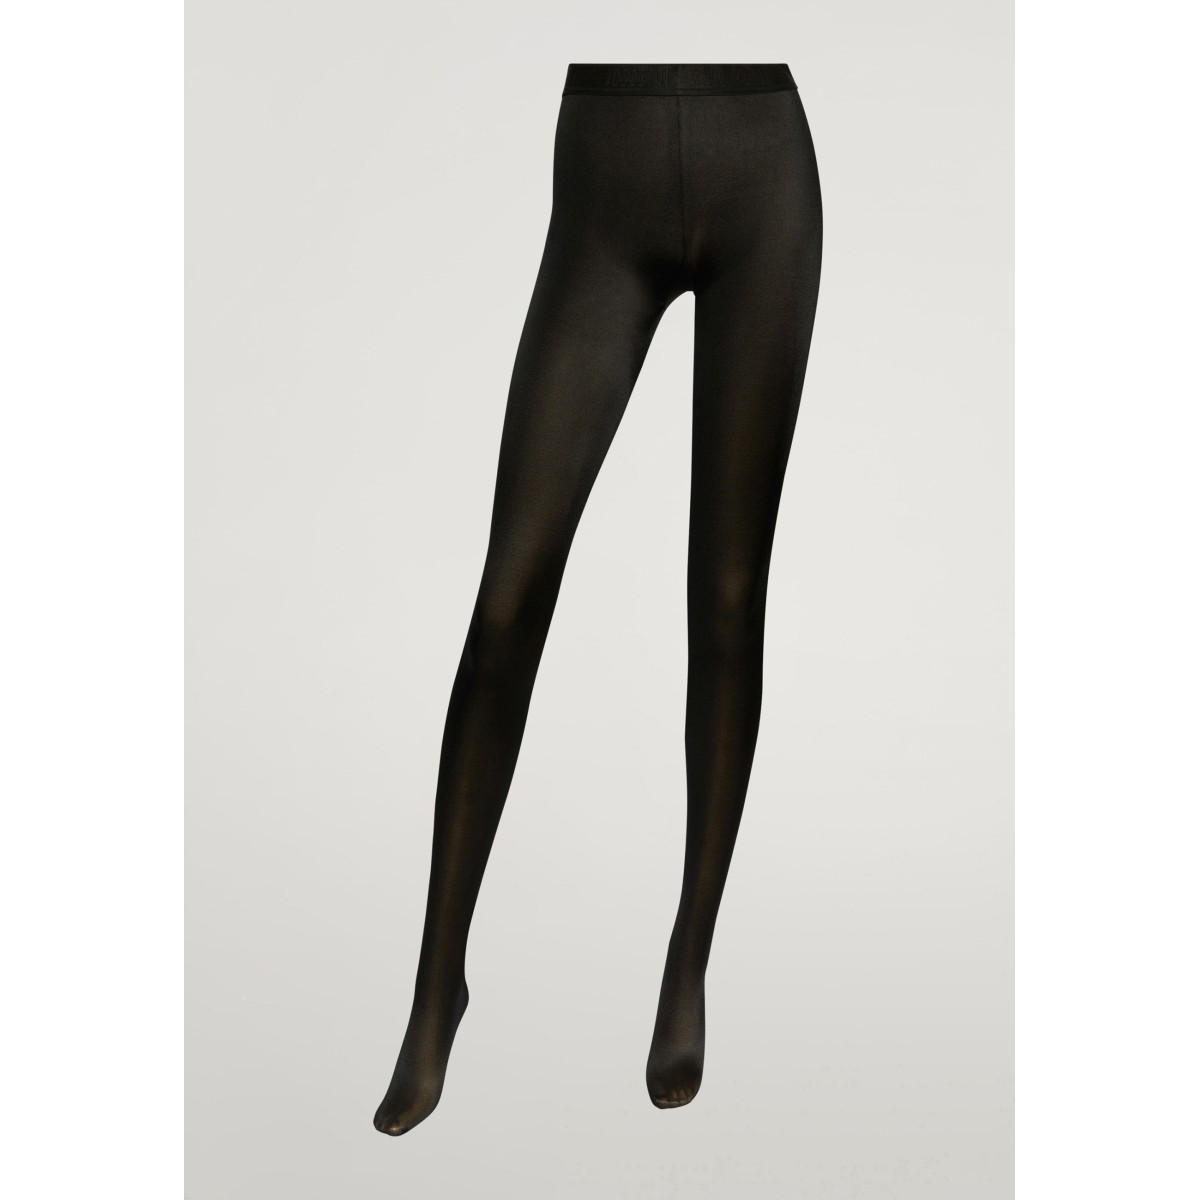 Wolford "Satin de luxe" tights